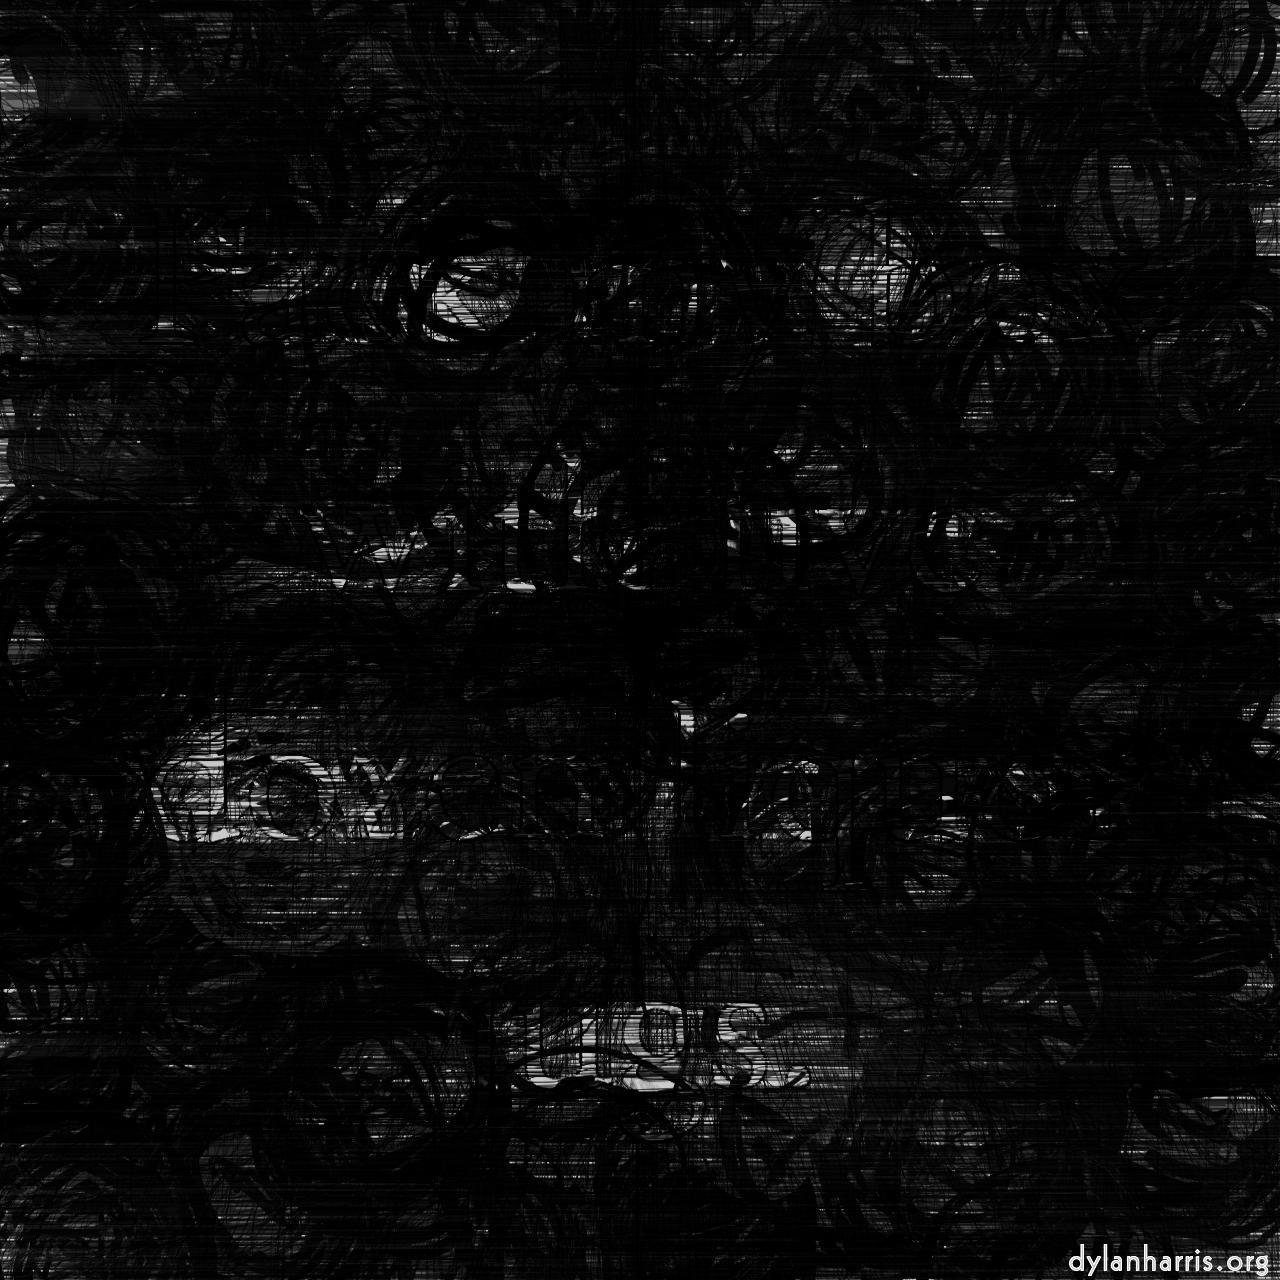 image: non-rep generative and abstract :: swirls and scribble sketch